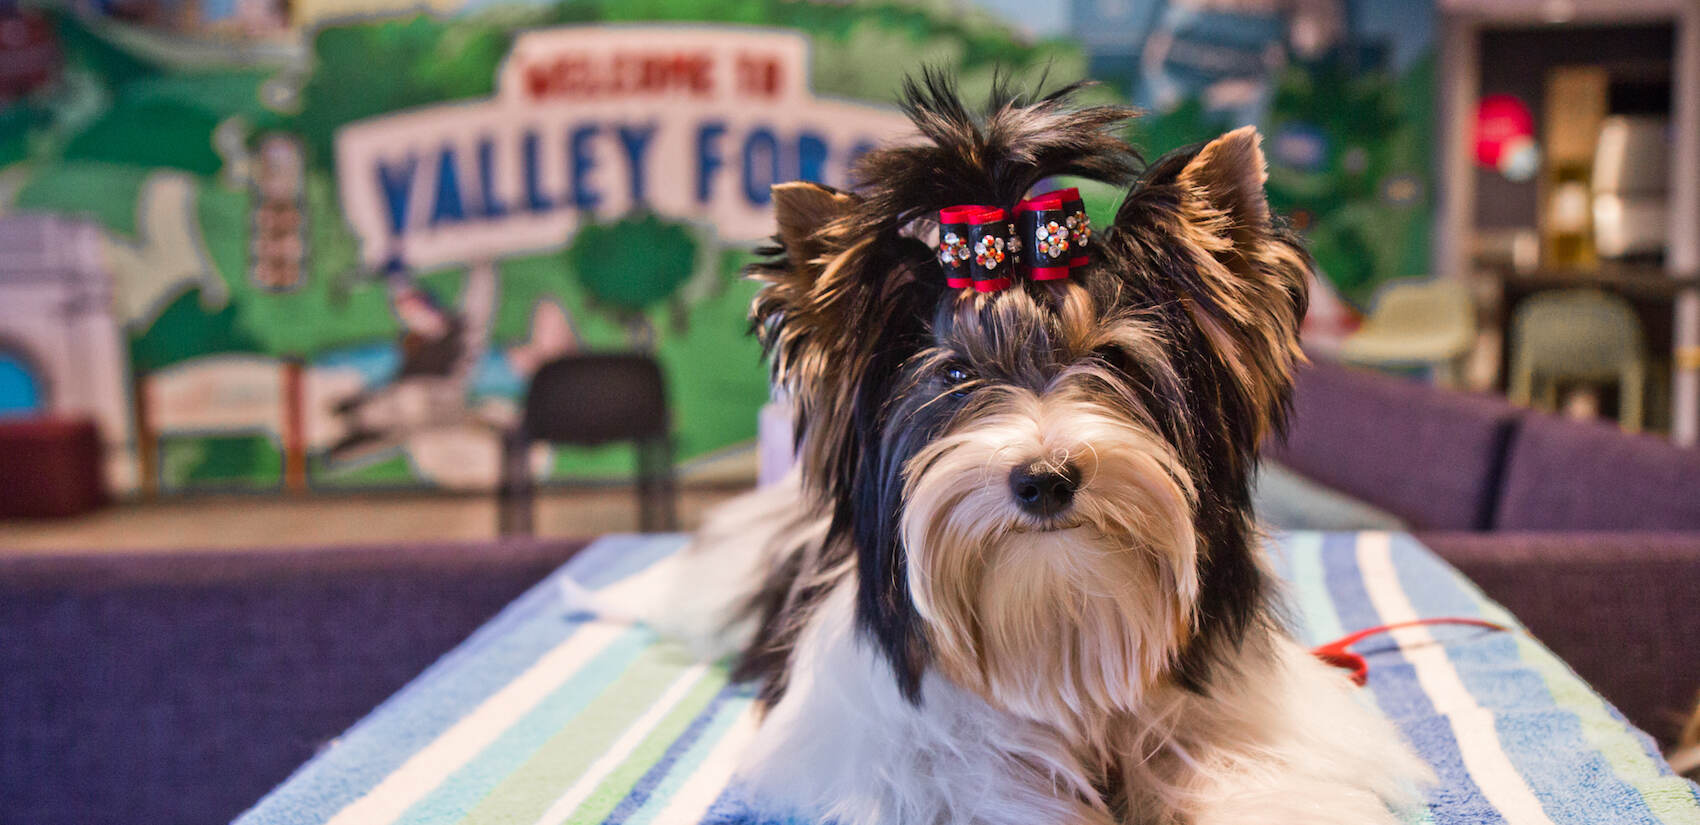 Rain, competing in the toy category, is one of the competitors in the 2021 National Dog Show, is an example of this year’s American Kennel Club’s introductory breed, a Biewer Terrier. (Kimberly Paynter/WHYY)